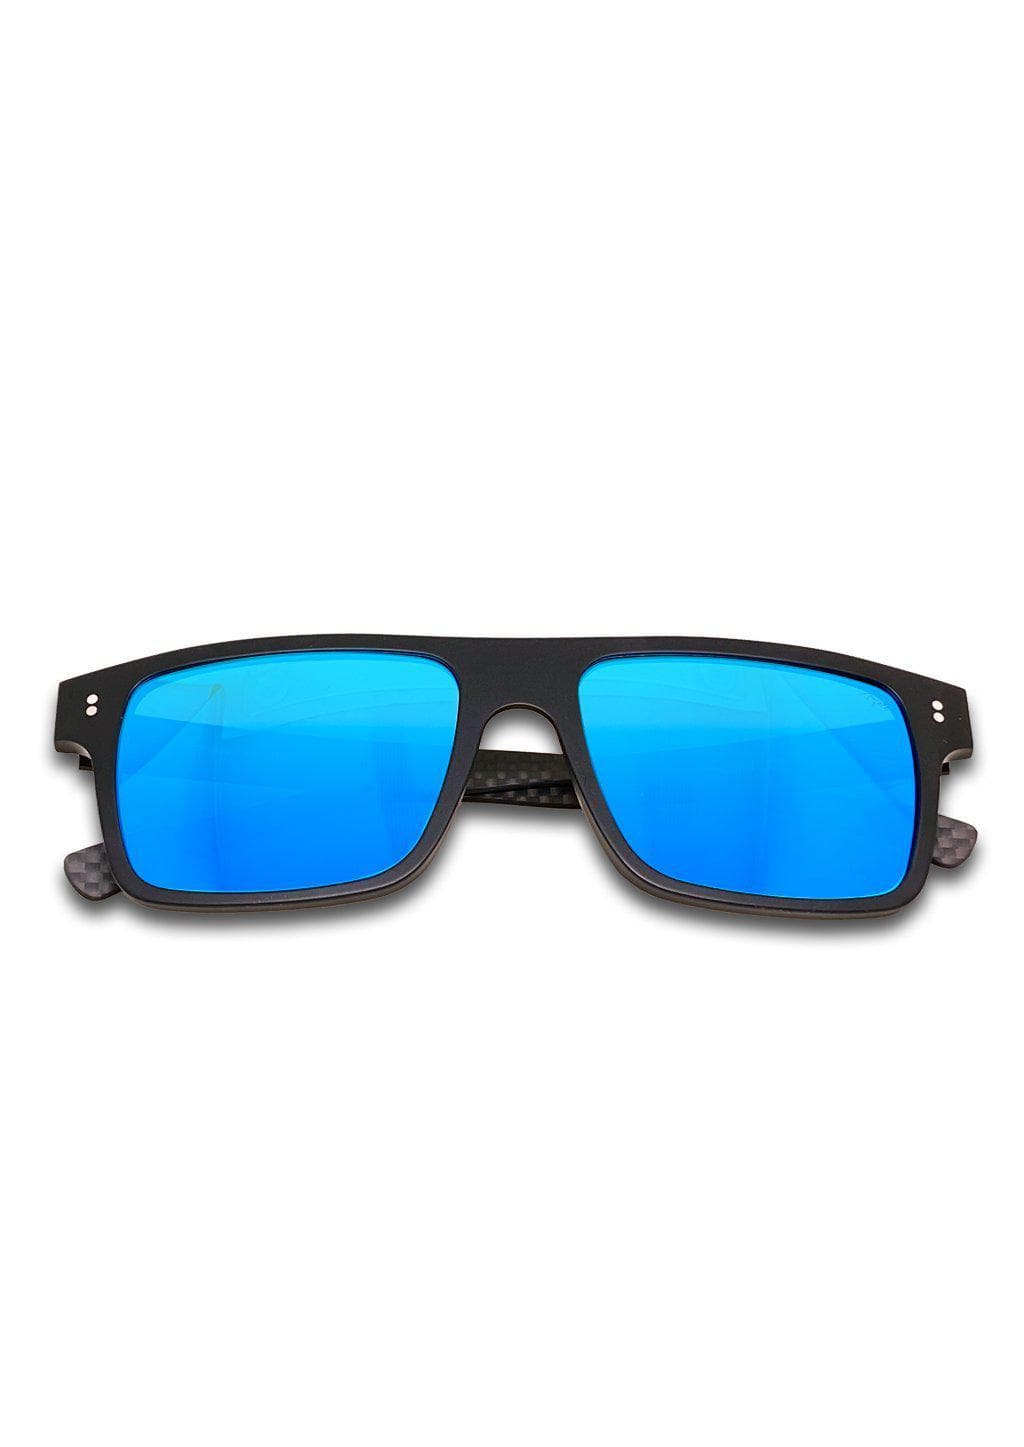 Hybrid - Cubic, carbon fiber and acetate sunglasses of the highest quality. Black frame and blue mirror lenses.